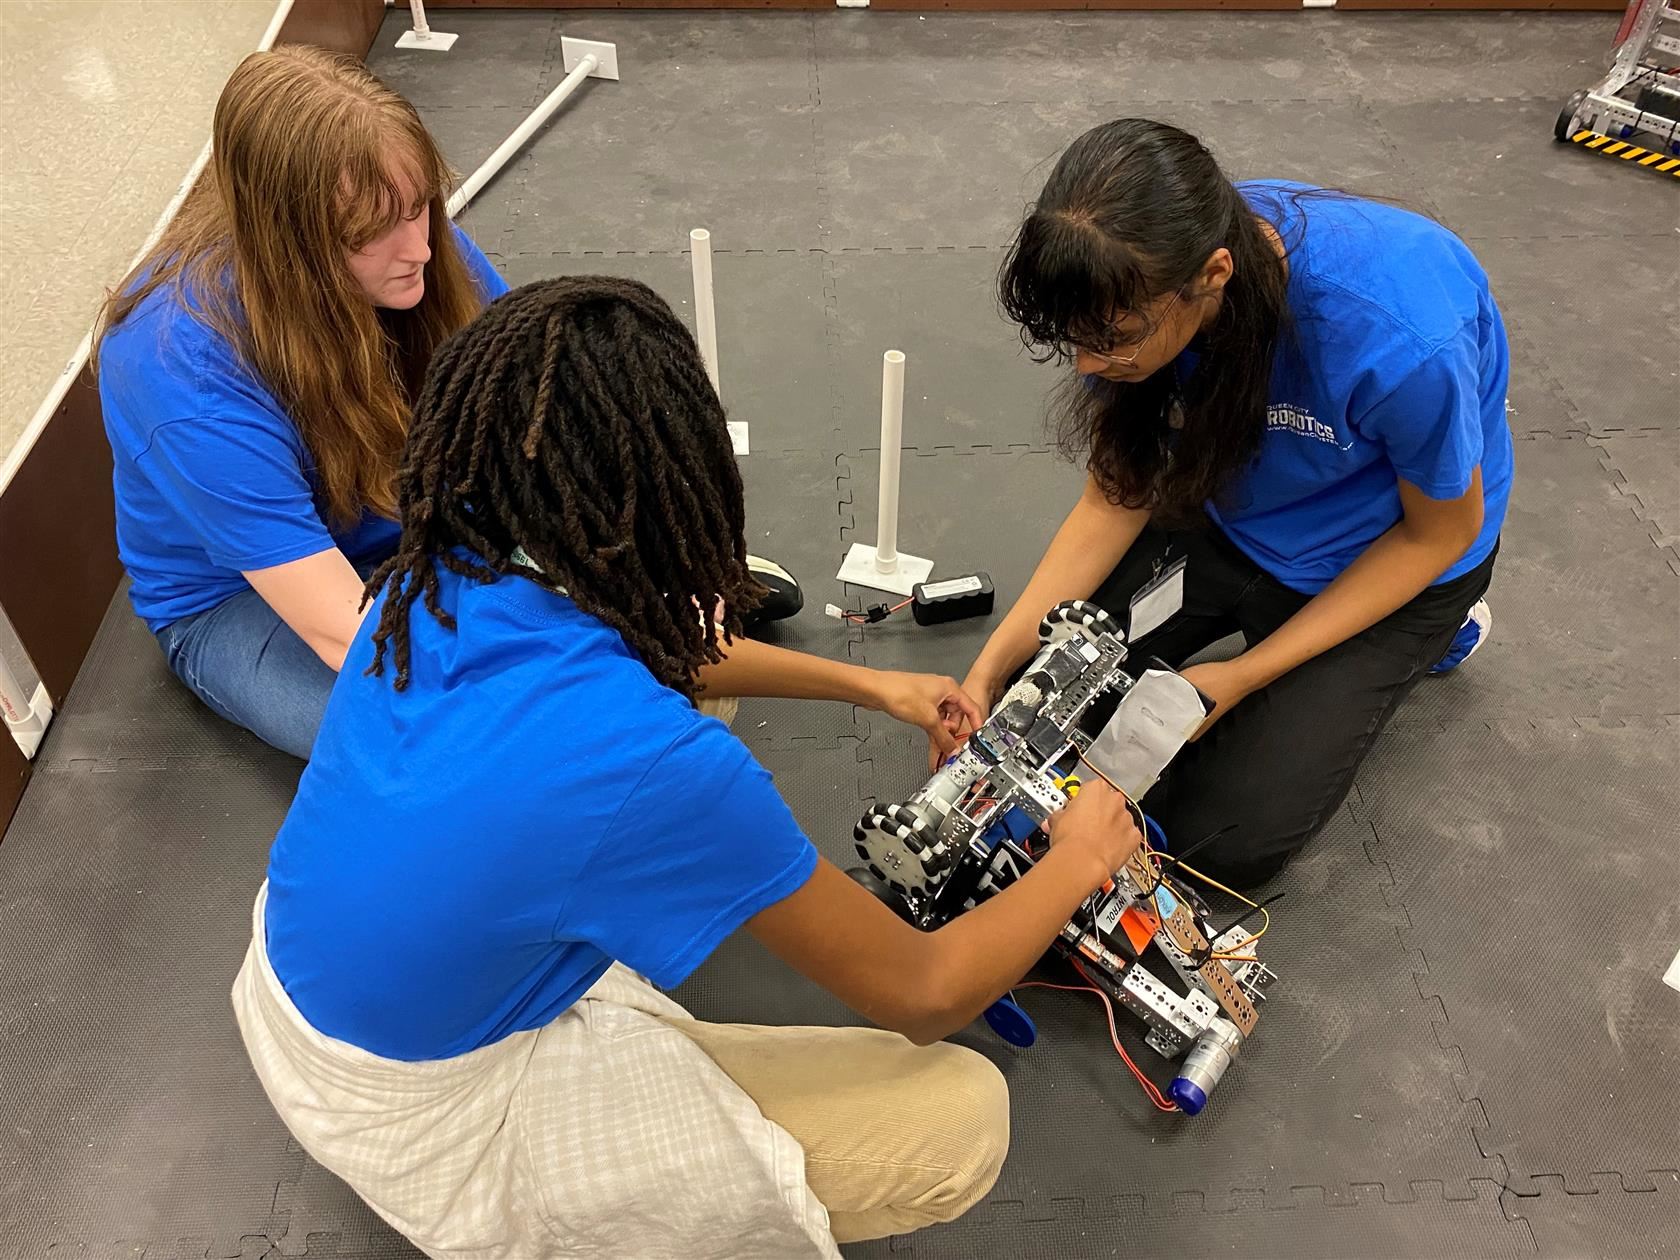  Students in blue shirts working on a robotics project on the ground